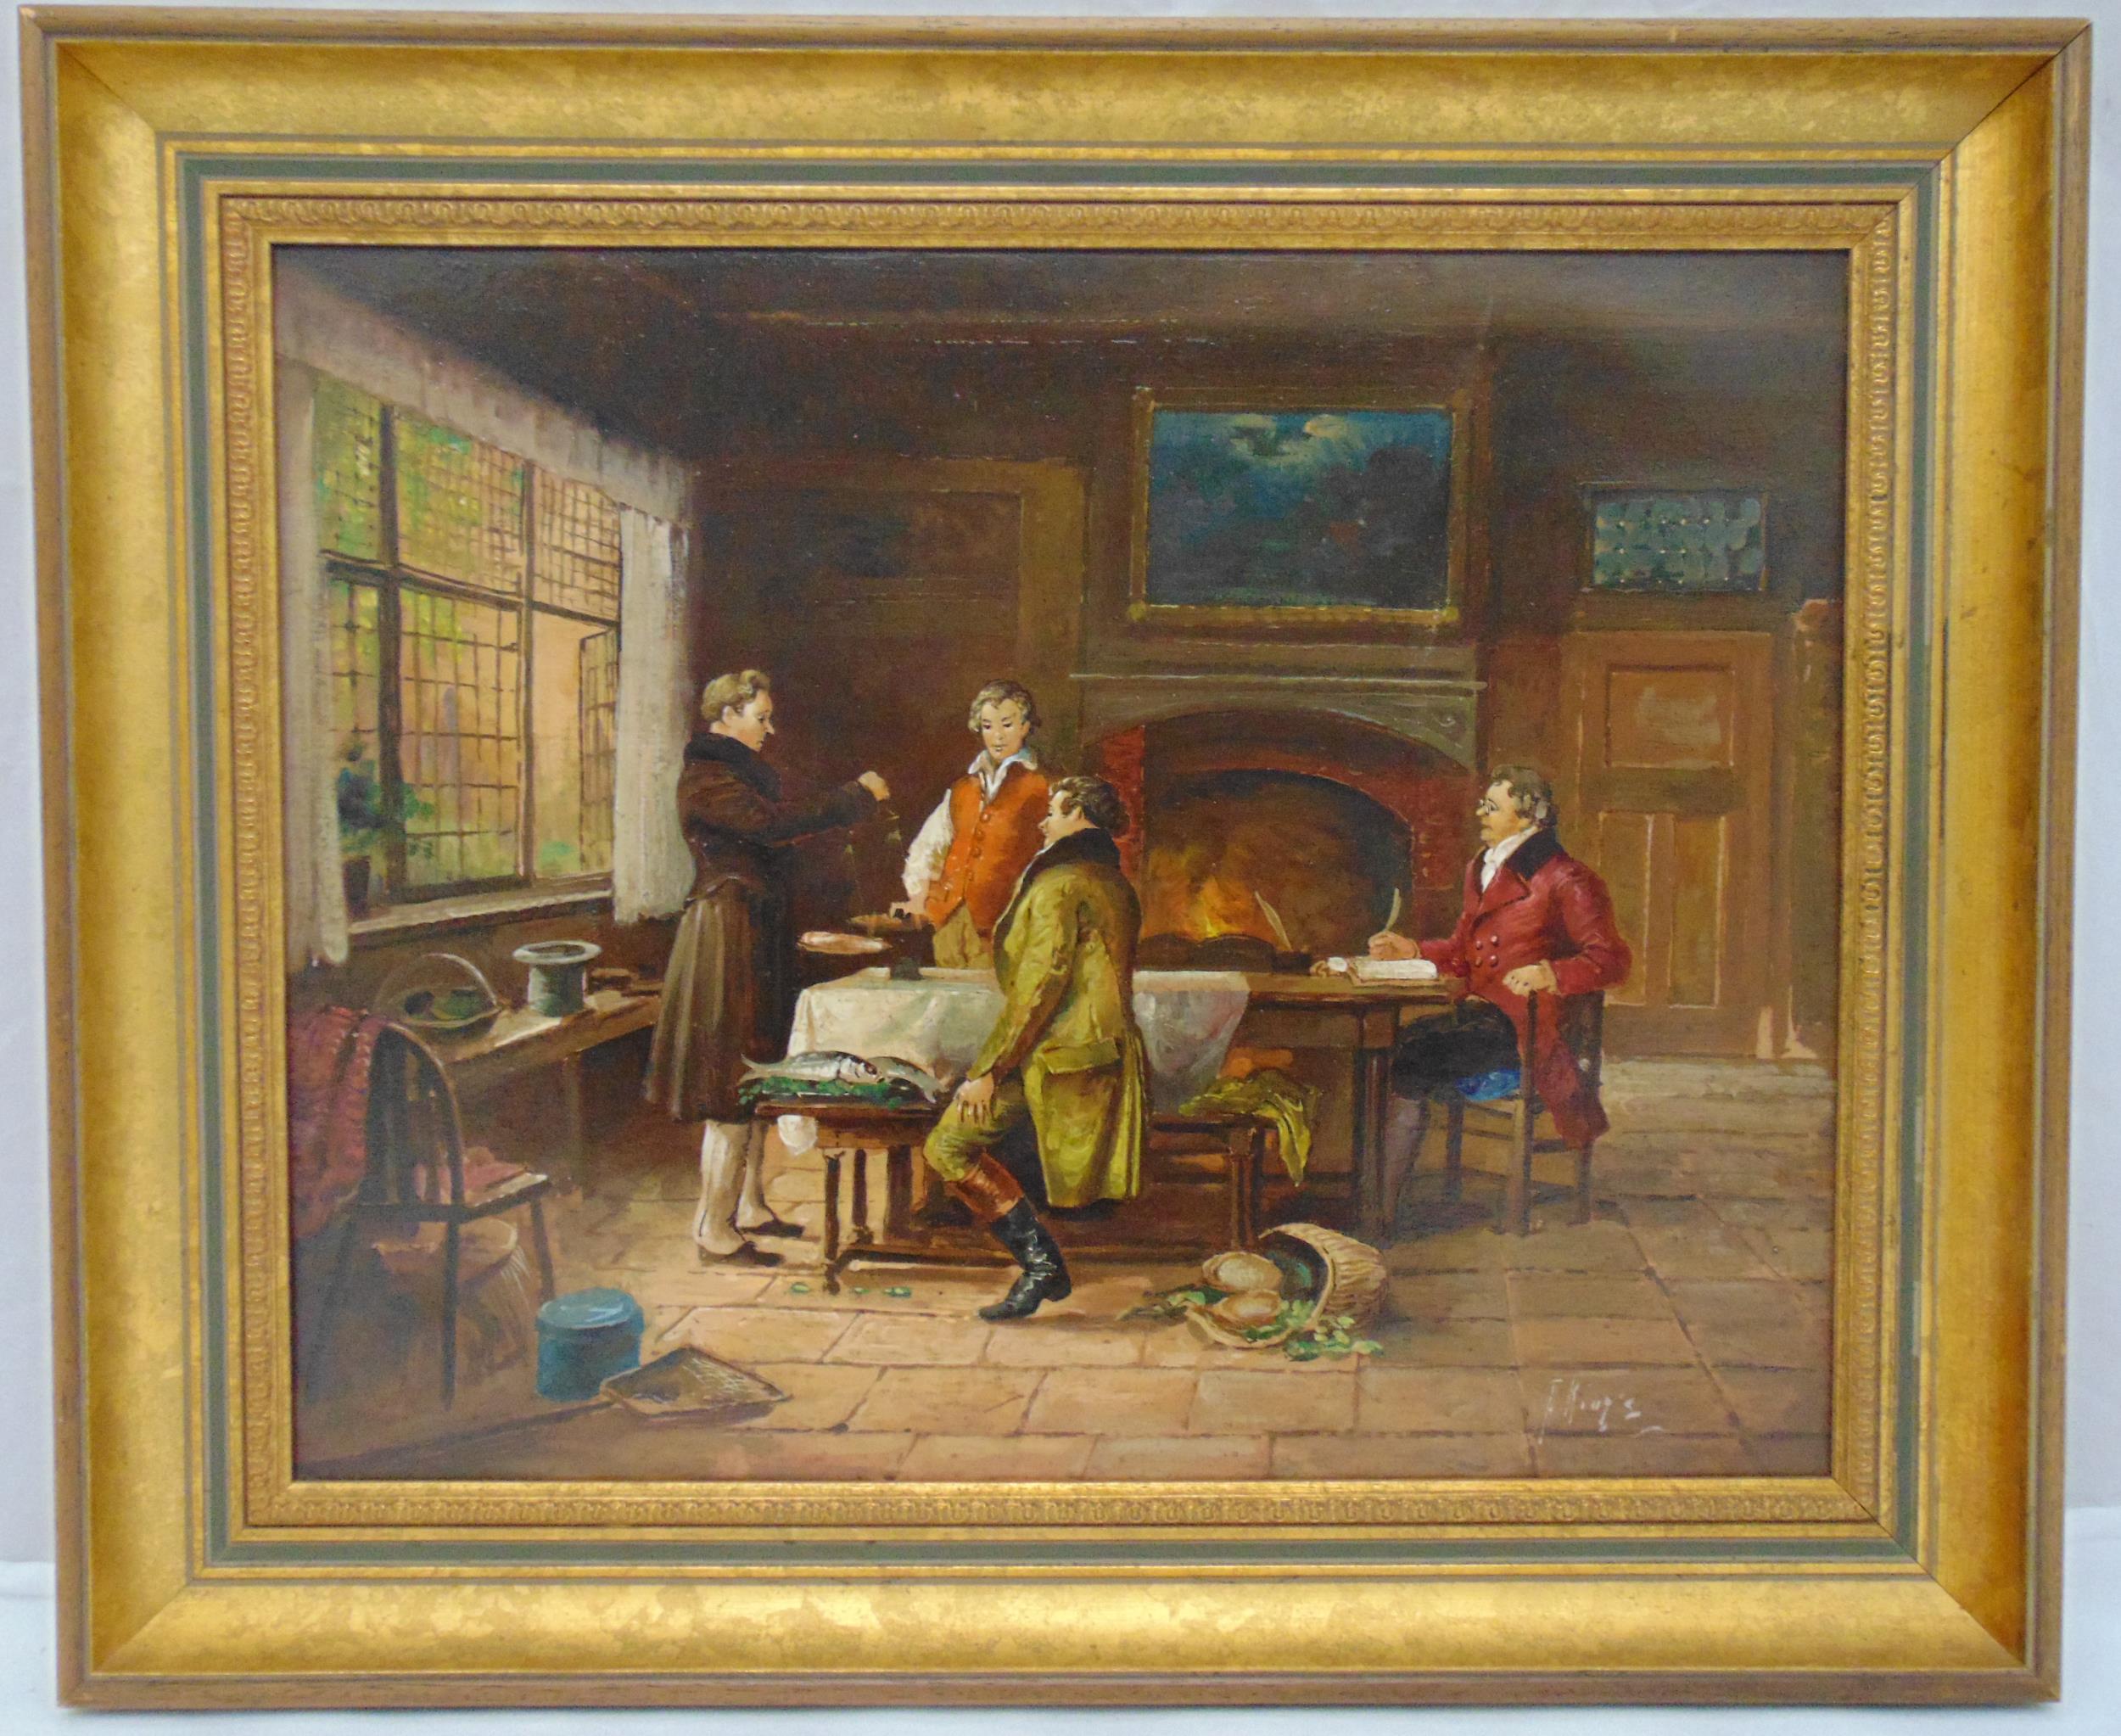 A framed oil on canvas of an 18th century interior scene indistinctly signed bottom right, 41 x